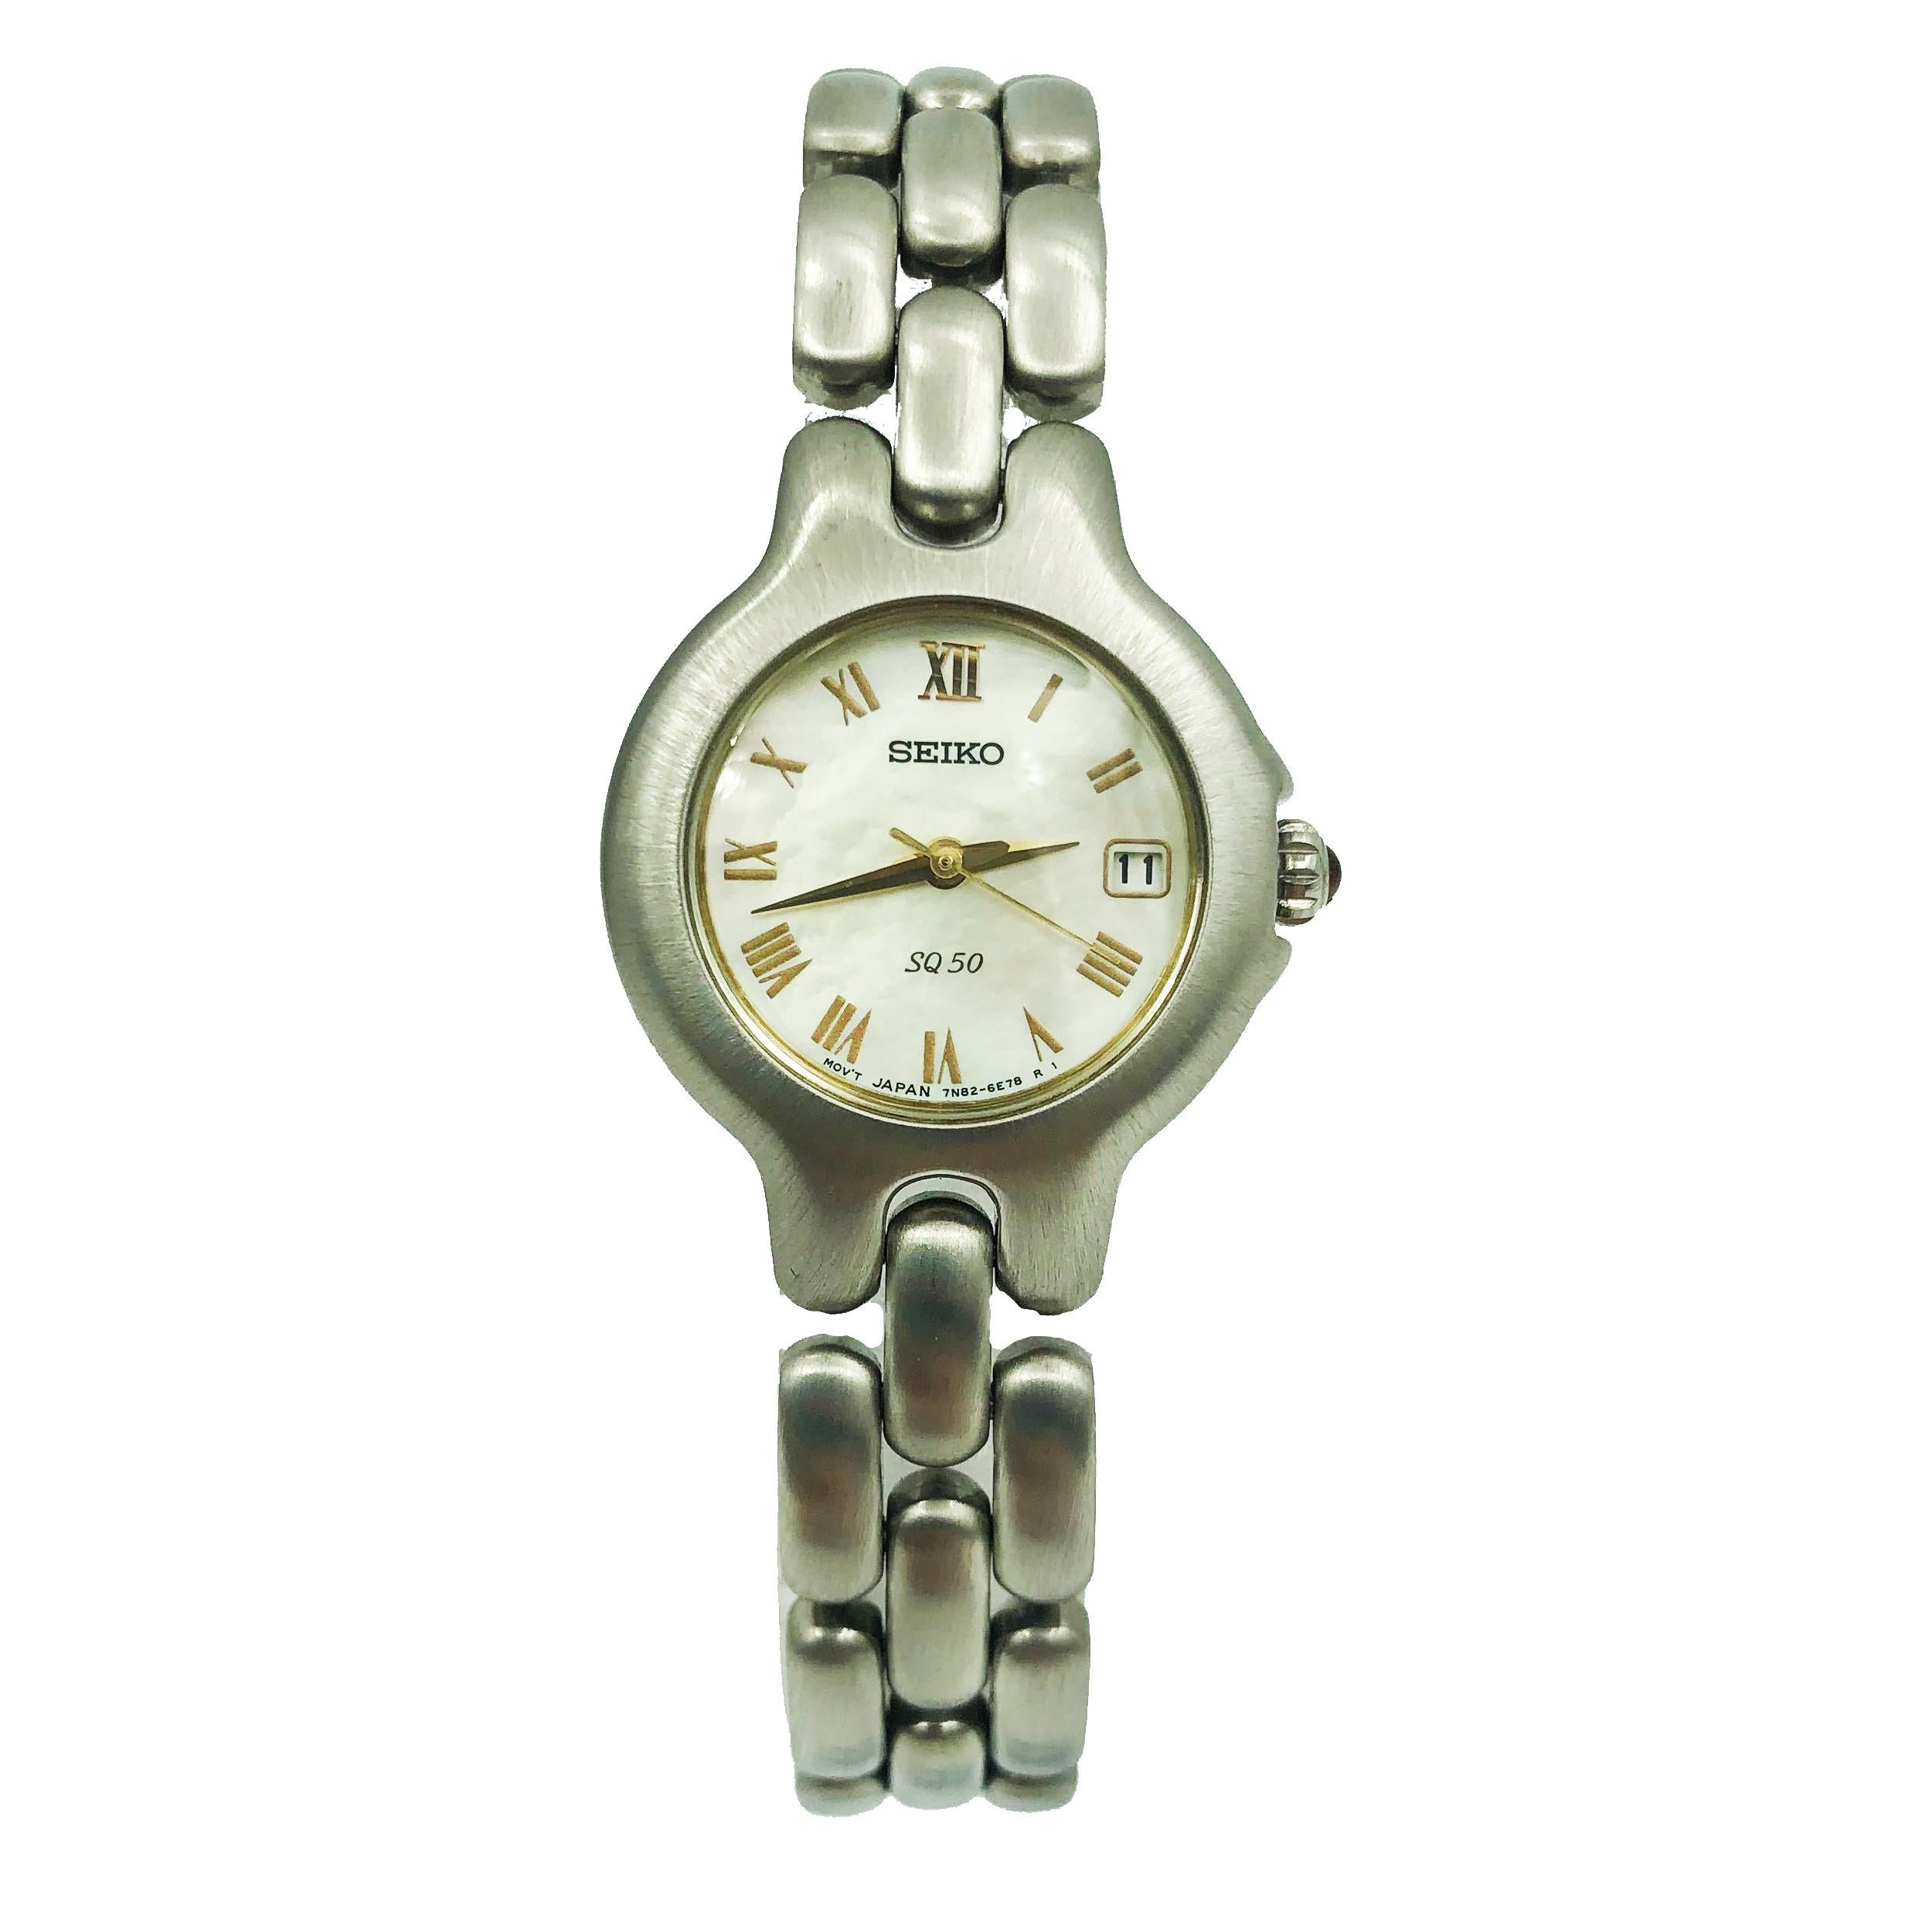 This Display Model Seiko Vivace Steel Case MOP Roman Dial Satin Steel Quartz Ladies Watch SXD255 is a beautiful Ladie's Timepiece that is Powered by Quartz (Battery) Movement and Features: a Stainless Steel Case and Bracelet. It has a Round Shape